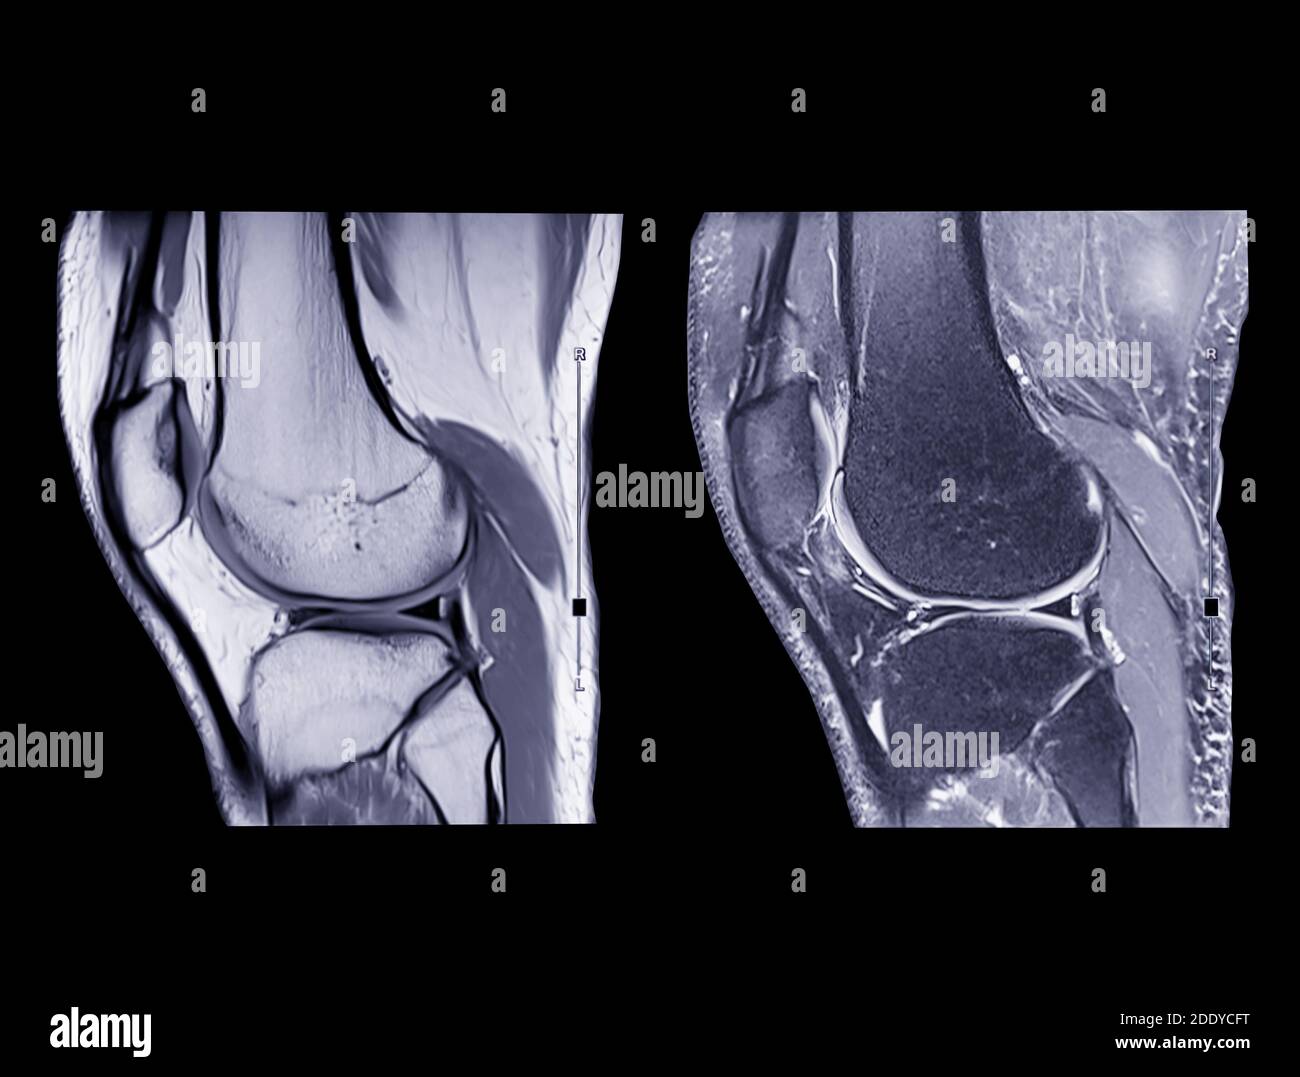 Magnetic resonance imaging or MRI knee comparison sagittal PDW and TIW view for detect tear or sprain of the anterior cruciate  ligament (ACL).clippin Stock Photo